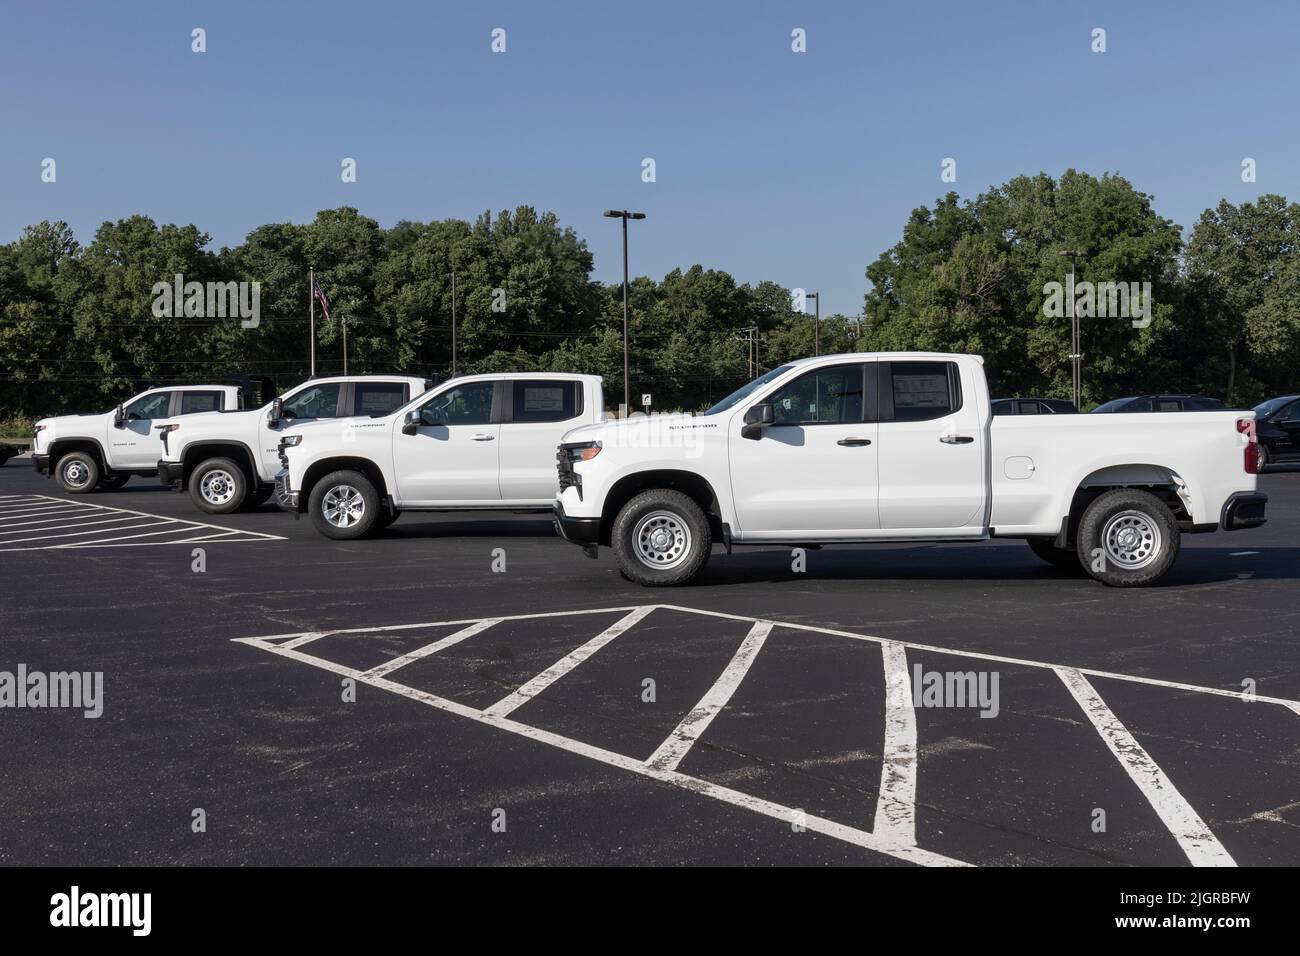 West Harrison - Circa July 2022: Chevrolet truck display. Chevy offers trucks in 1500, 2500, 3500, 4500 and 5500 models. Stock Photo